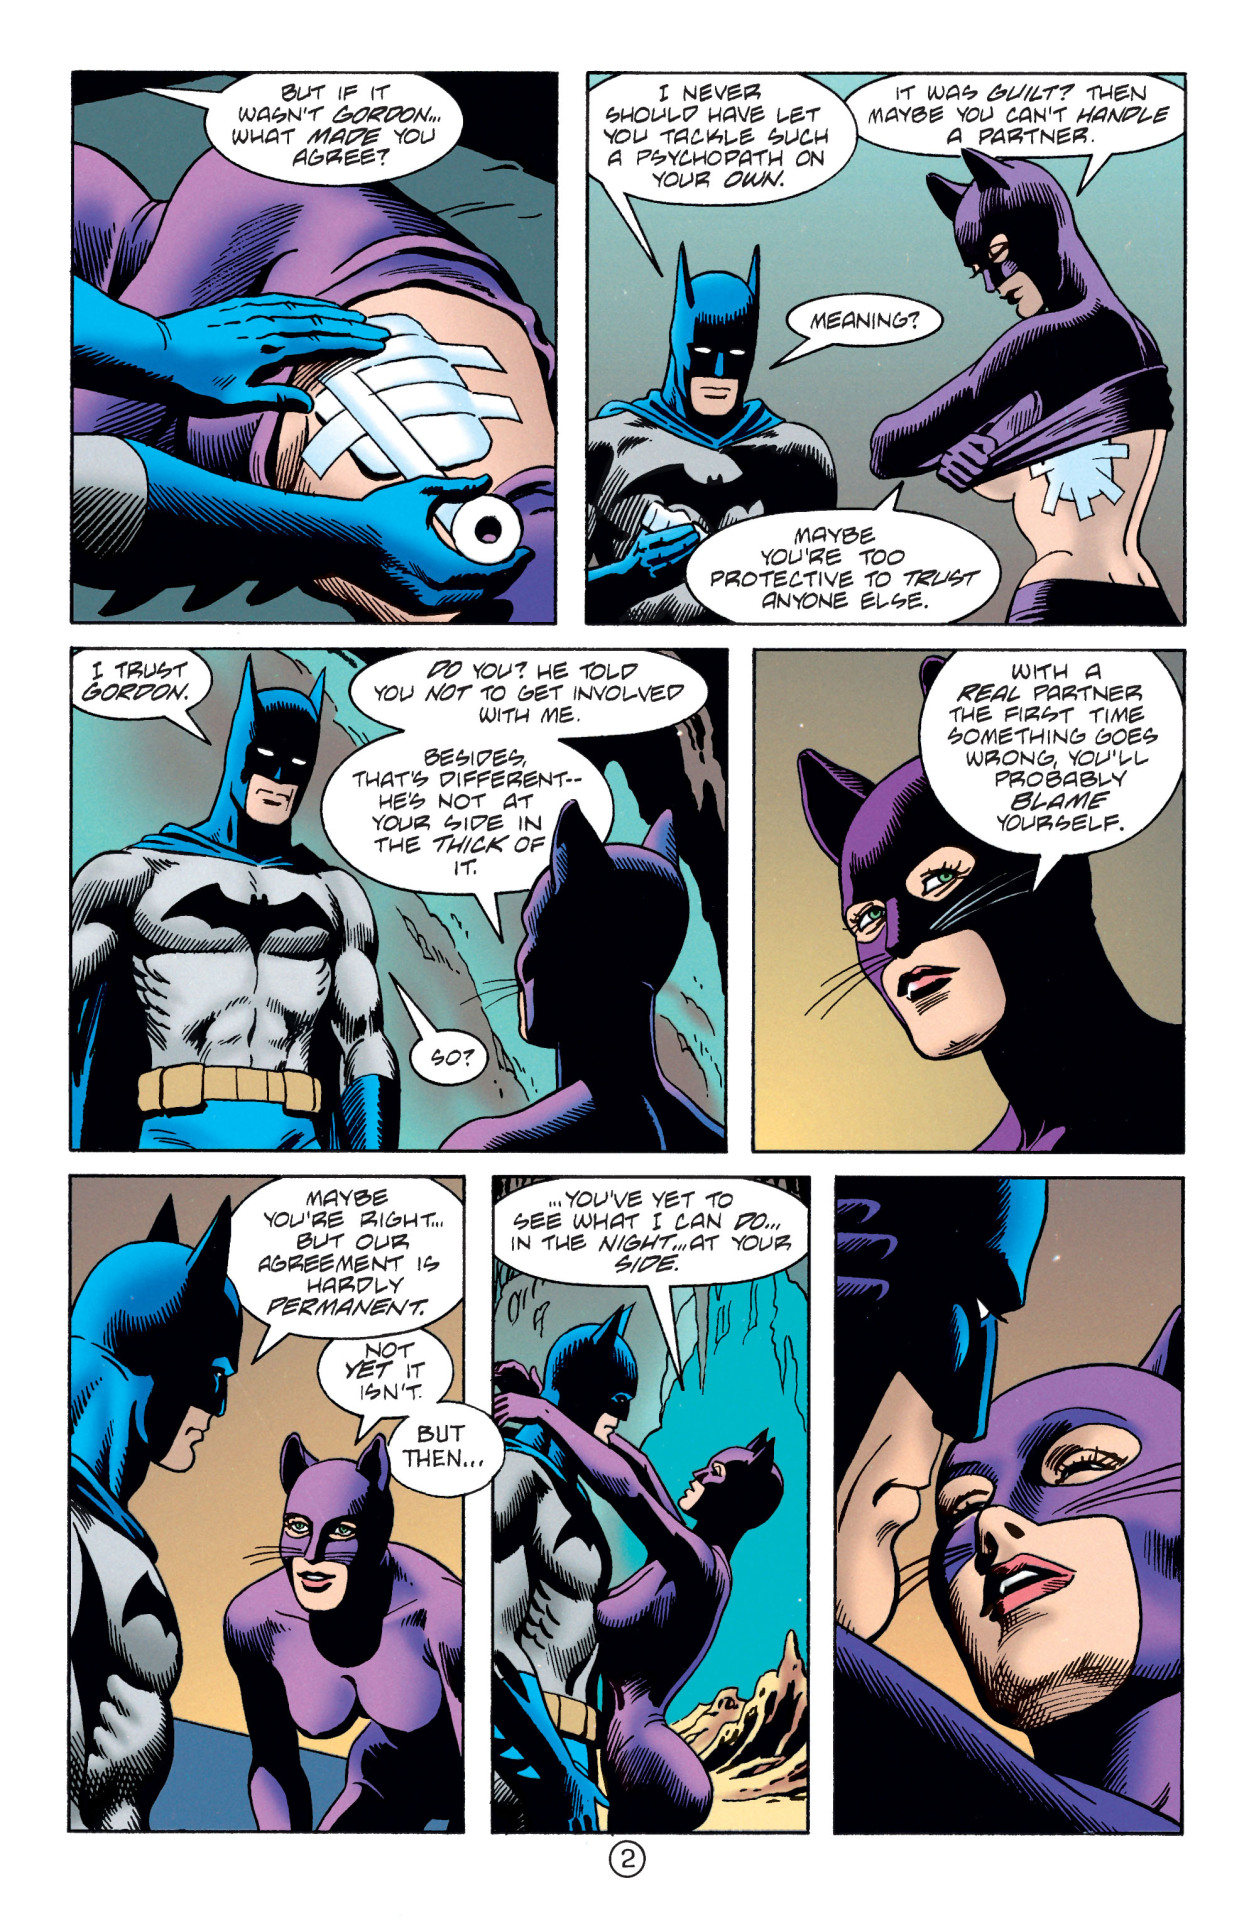 Batman: Legends of the Dark Knight, issue # 48 (August 1993).
Batman and Catwoman together in the Batcave. She knows him so well.